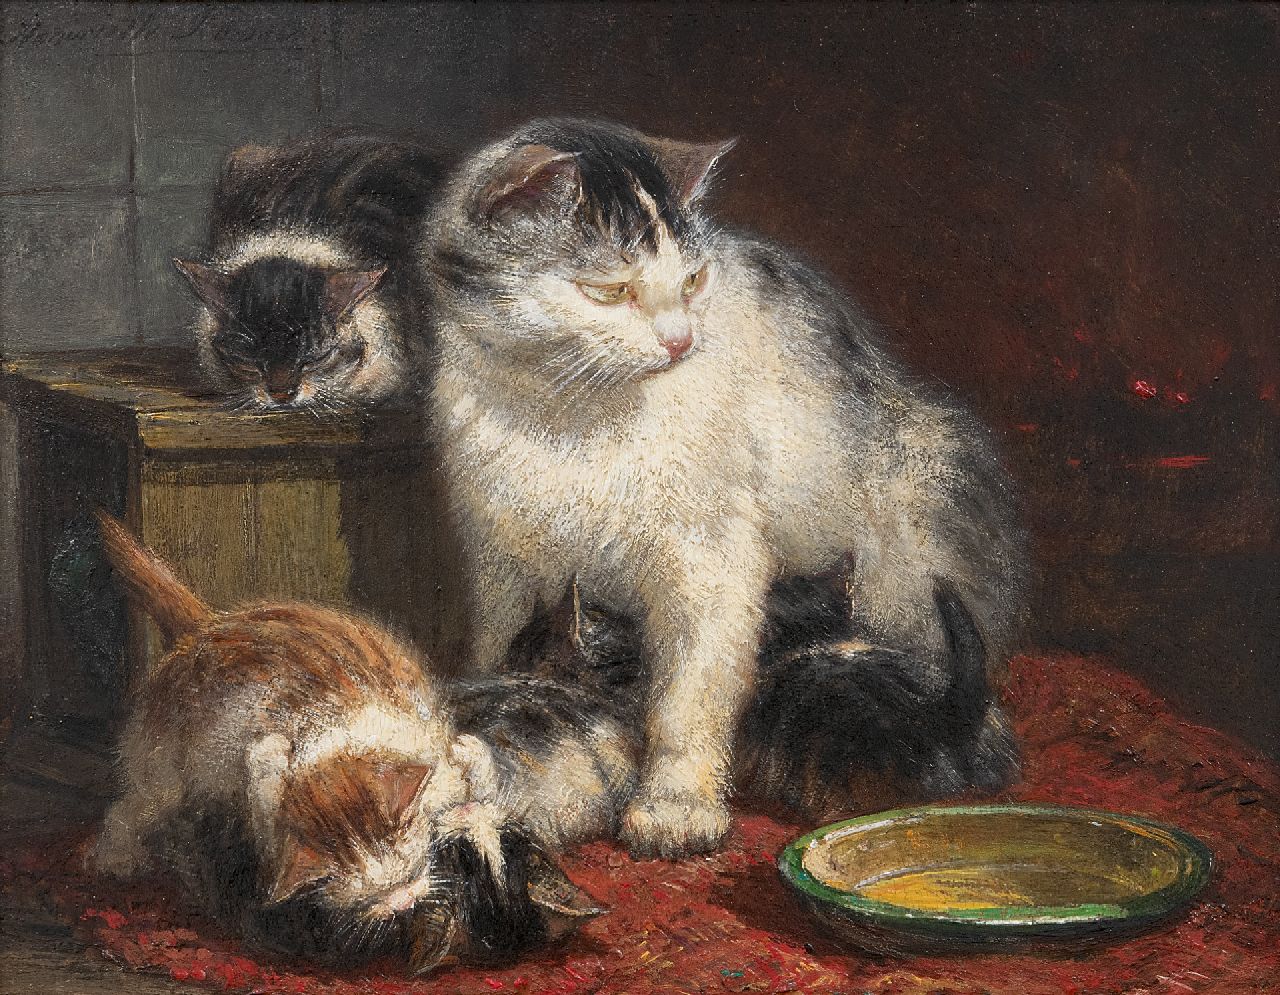 Ronner-Knip H.  | Henriette Ronner-Knip, A watchful mother, oil on panel 16.1 x 20.3 cm, signed u.l.